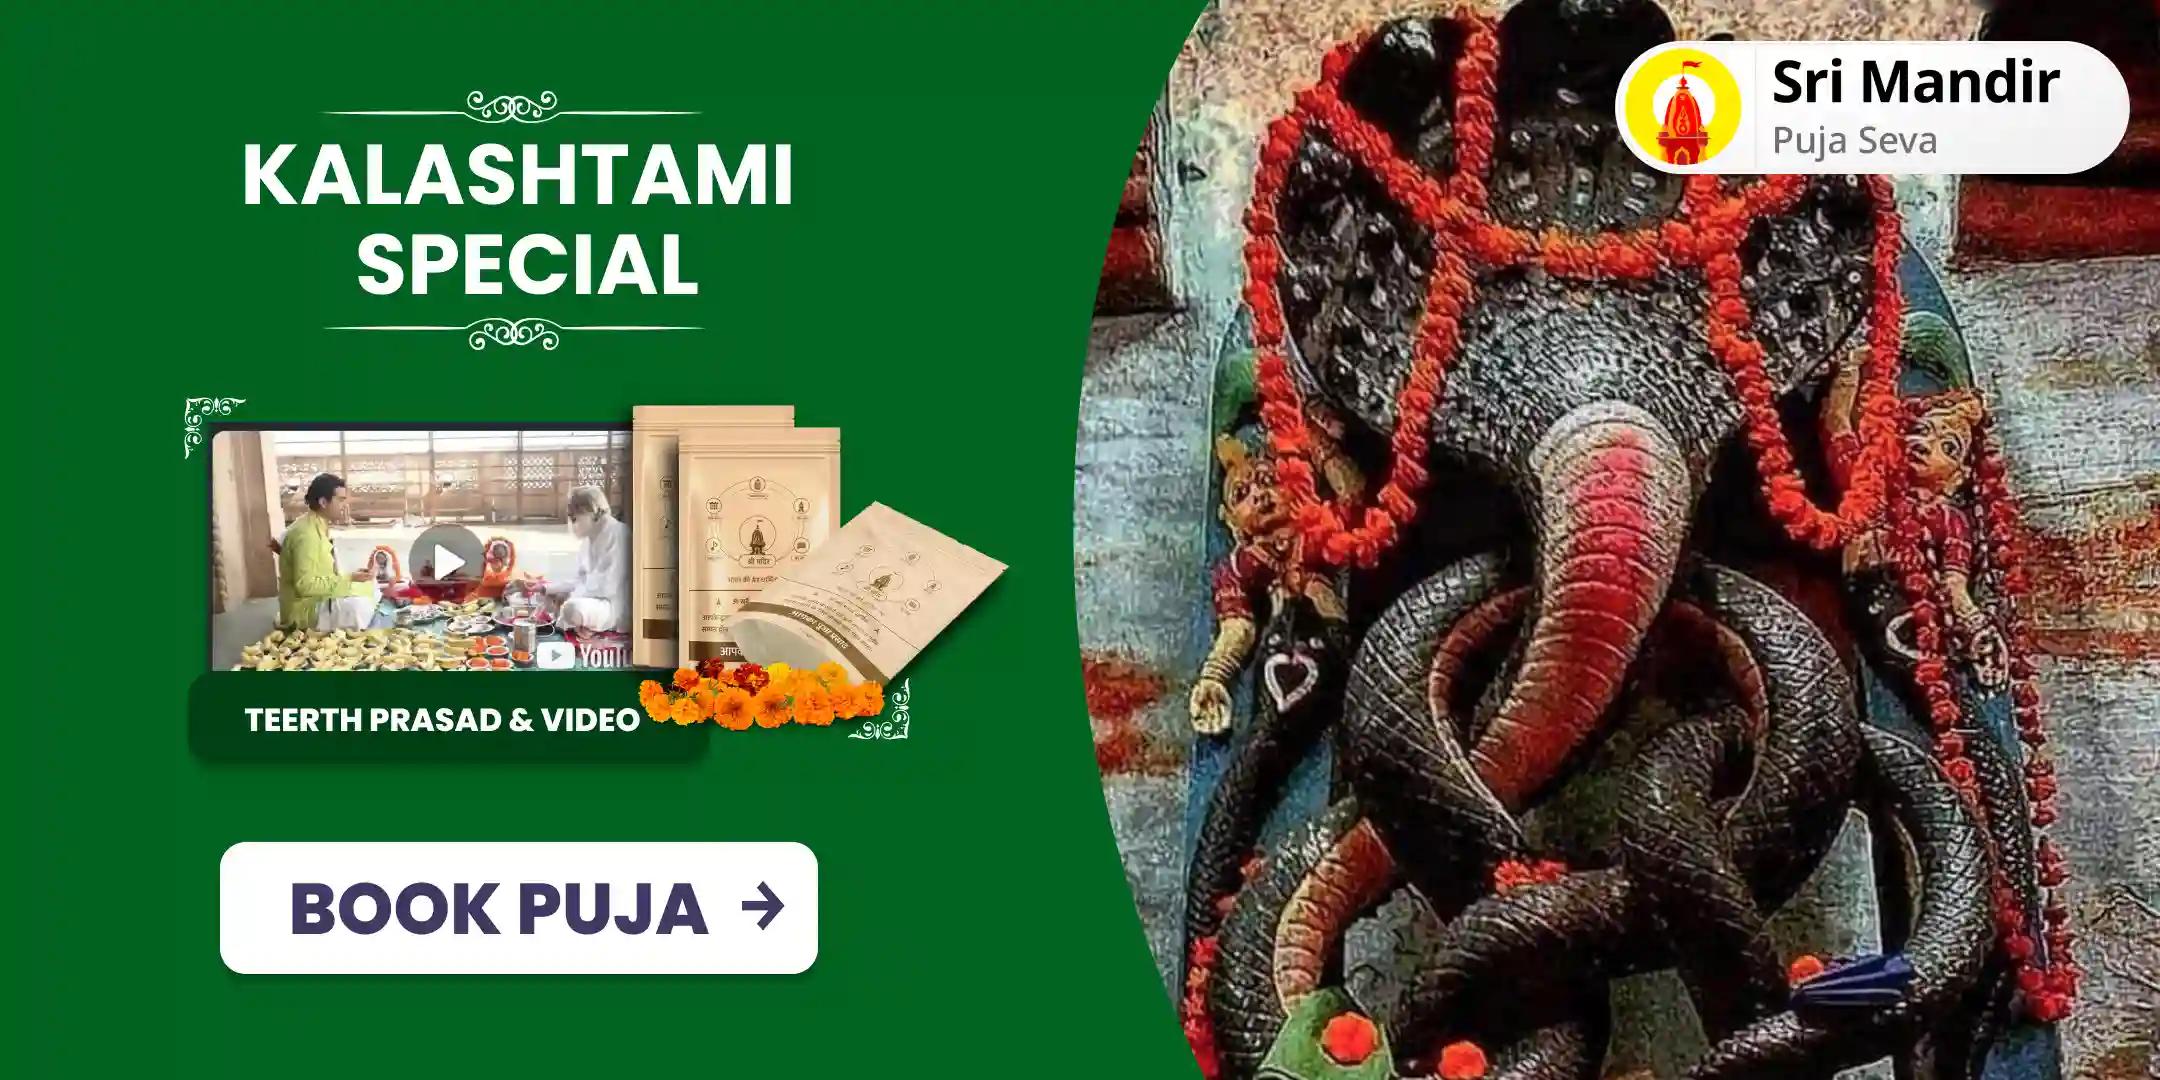 Kalashtami Special Kaal Sarp Dosha Shanti Puja and Rudra Abhishek For Eliminating the Fear of Death and Achieving Mental Stability 